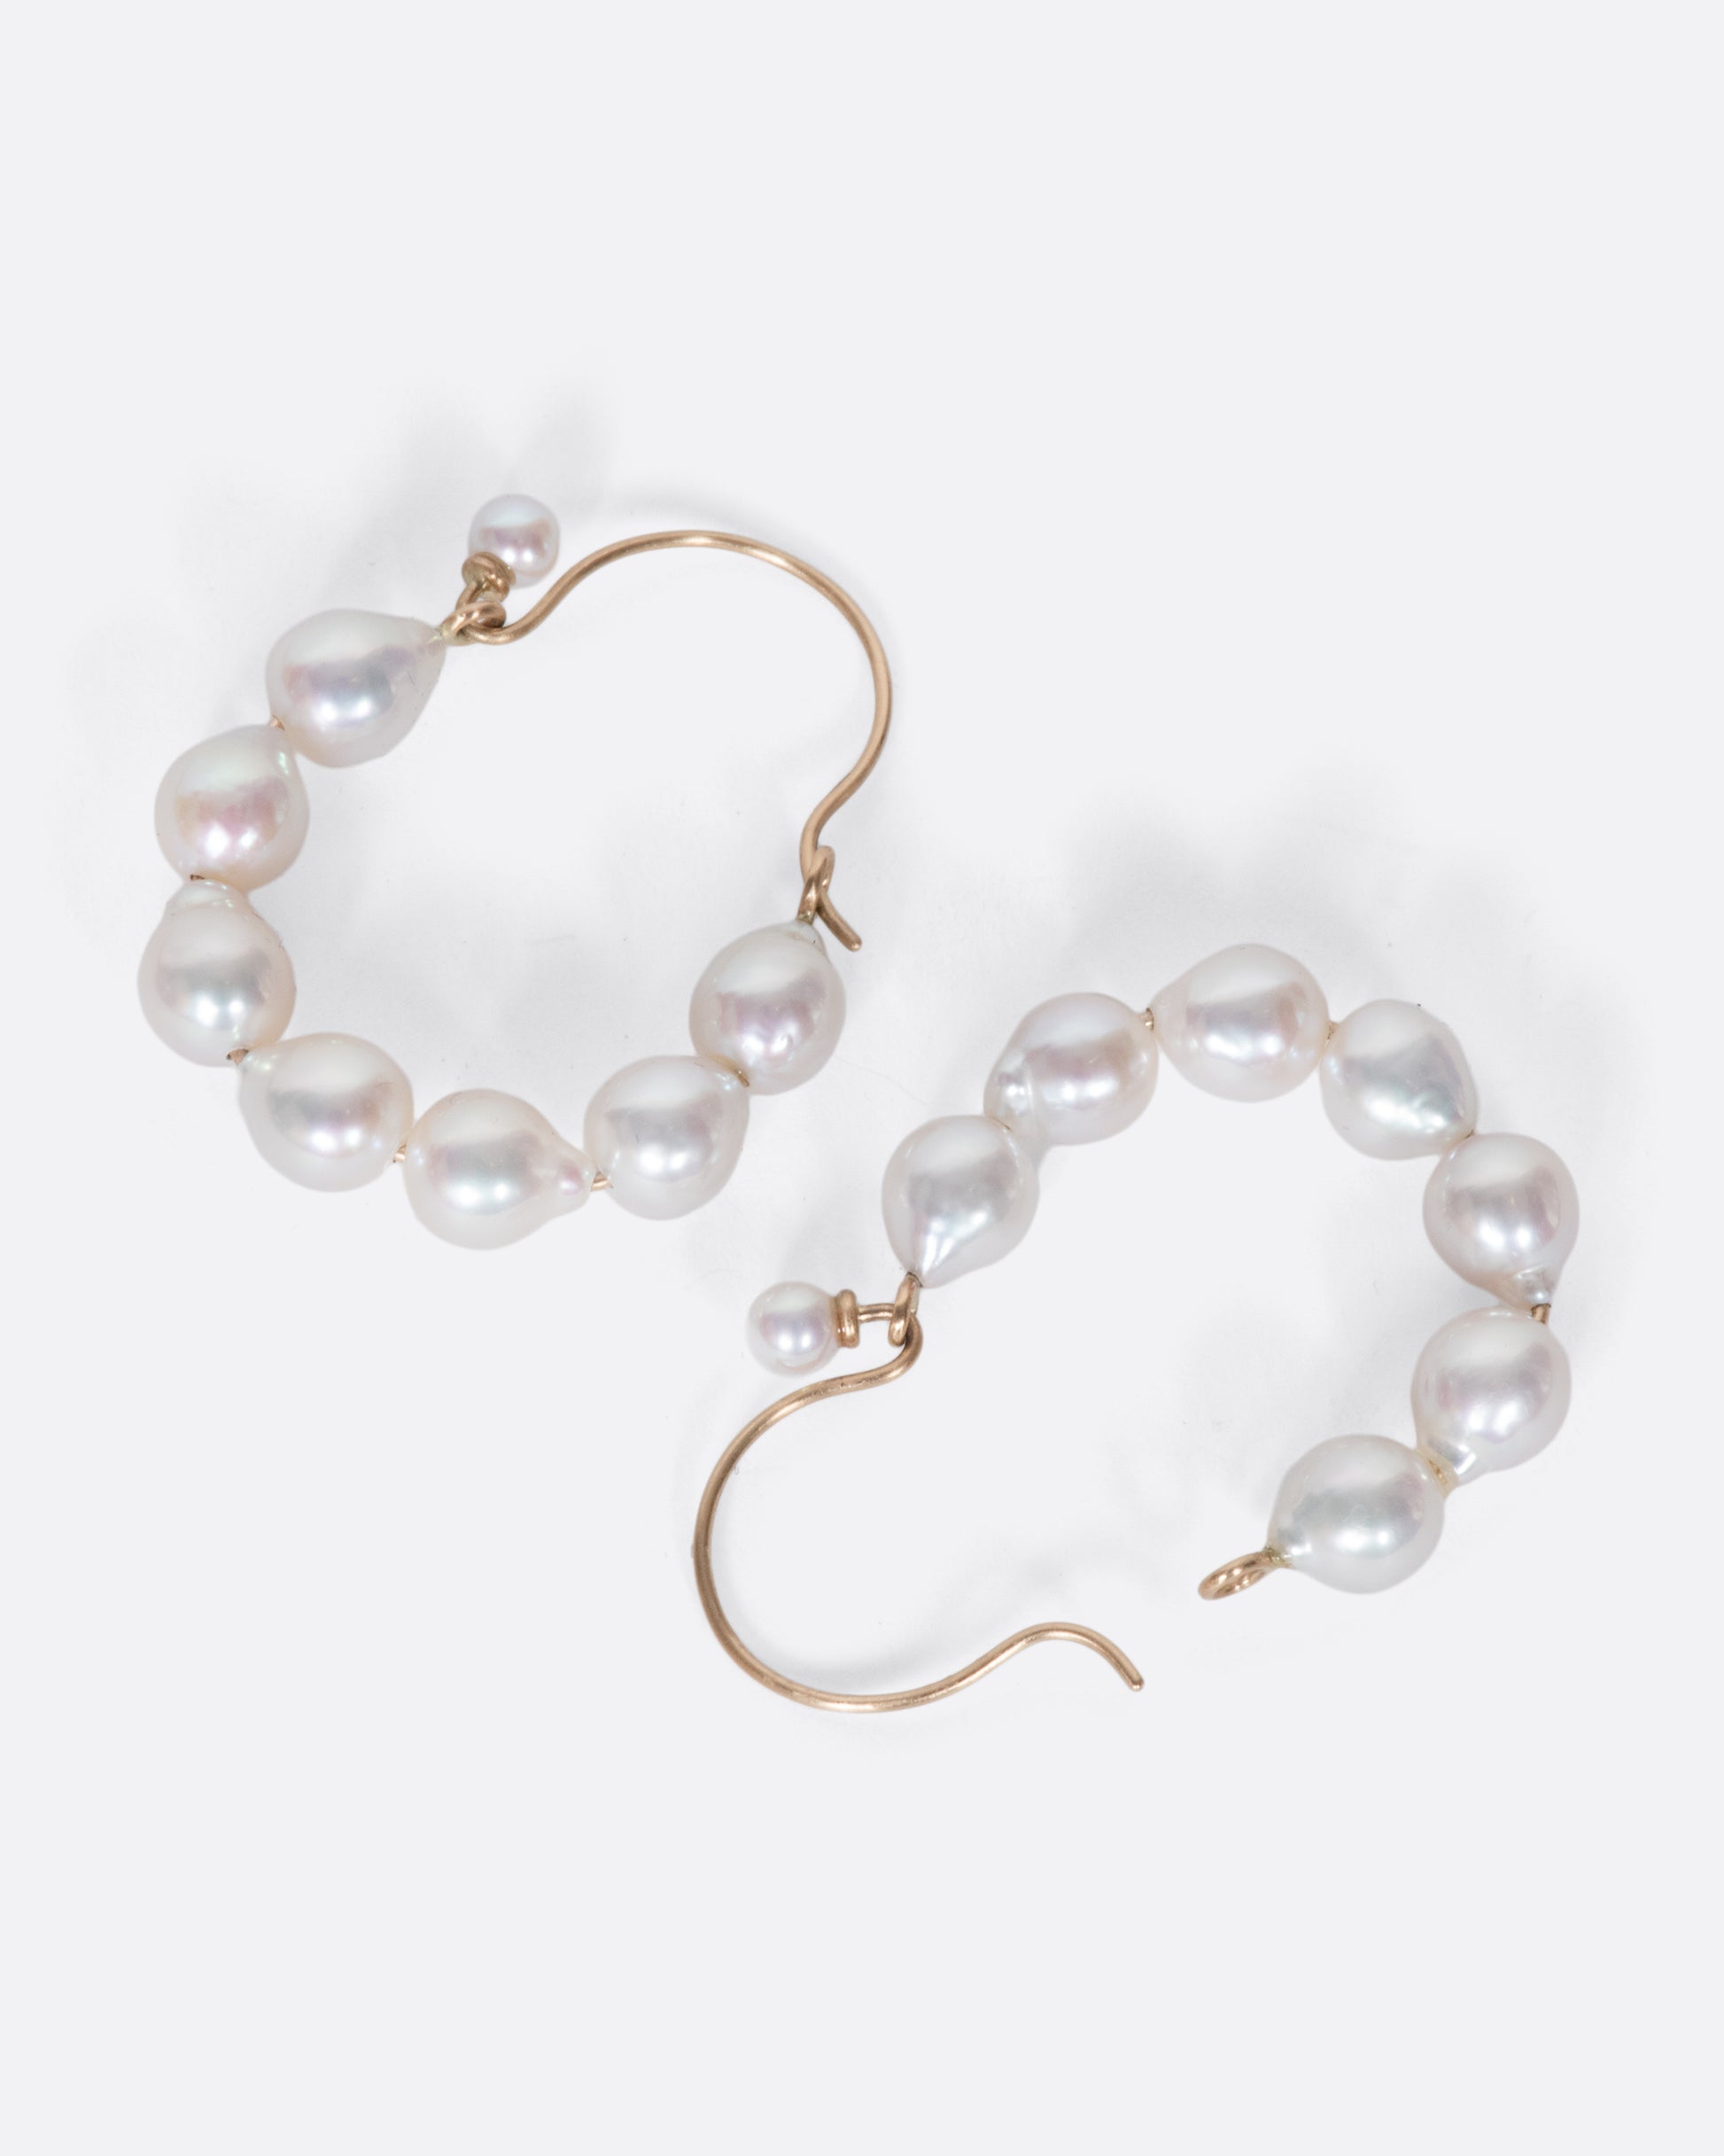 A lovely pair of baroque pearl hoops with a tiny pearl hiding the closure